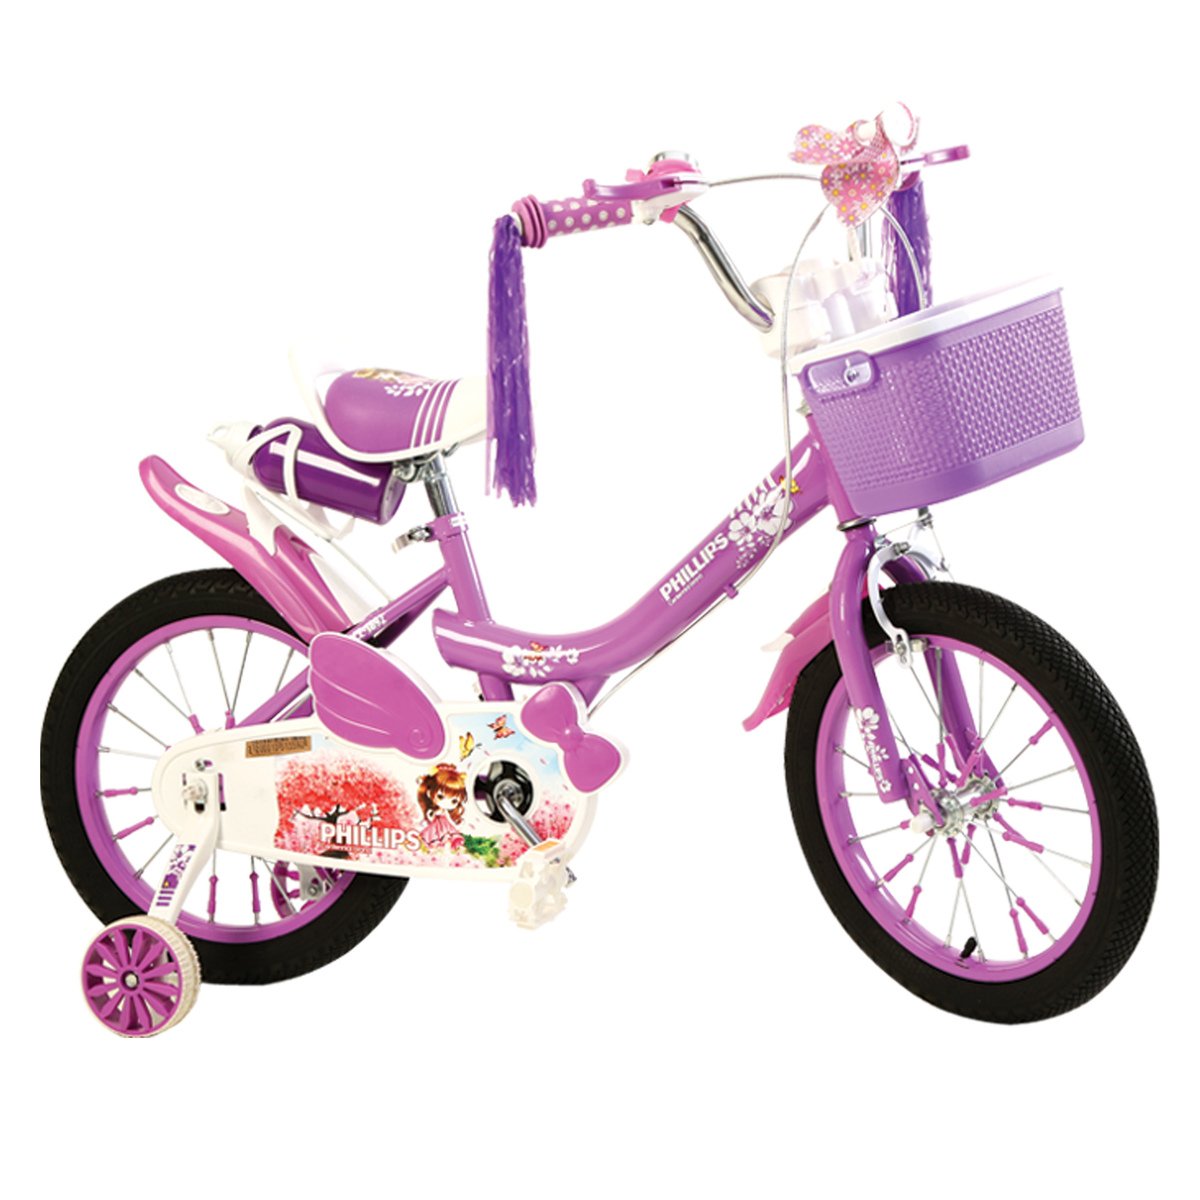 Skid Fusion Kids Bicycle 12Inch WYYD-12 Assorted Color